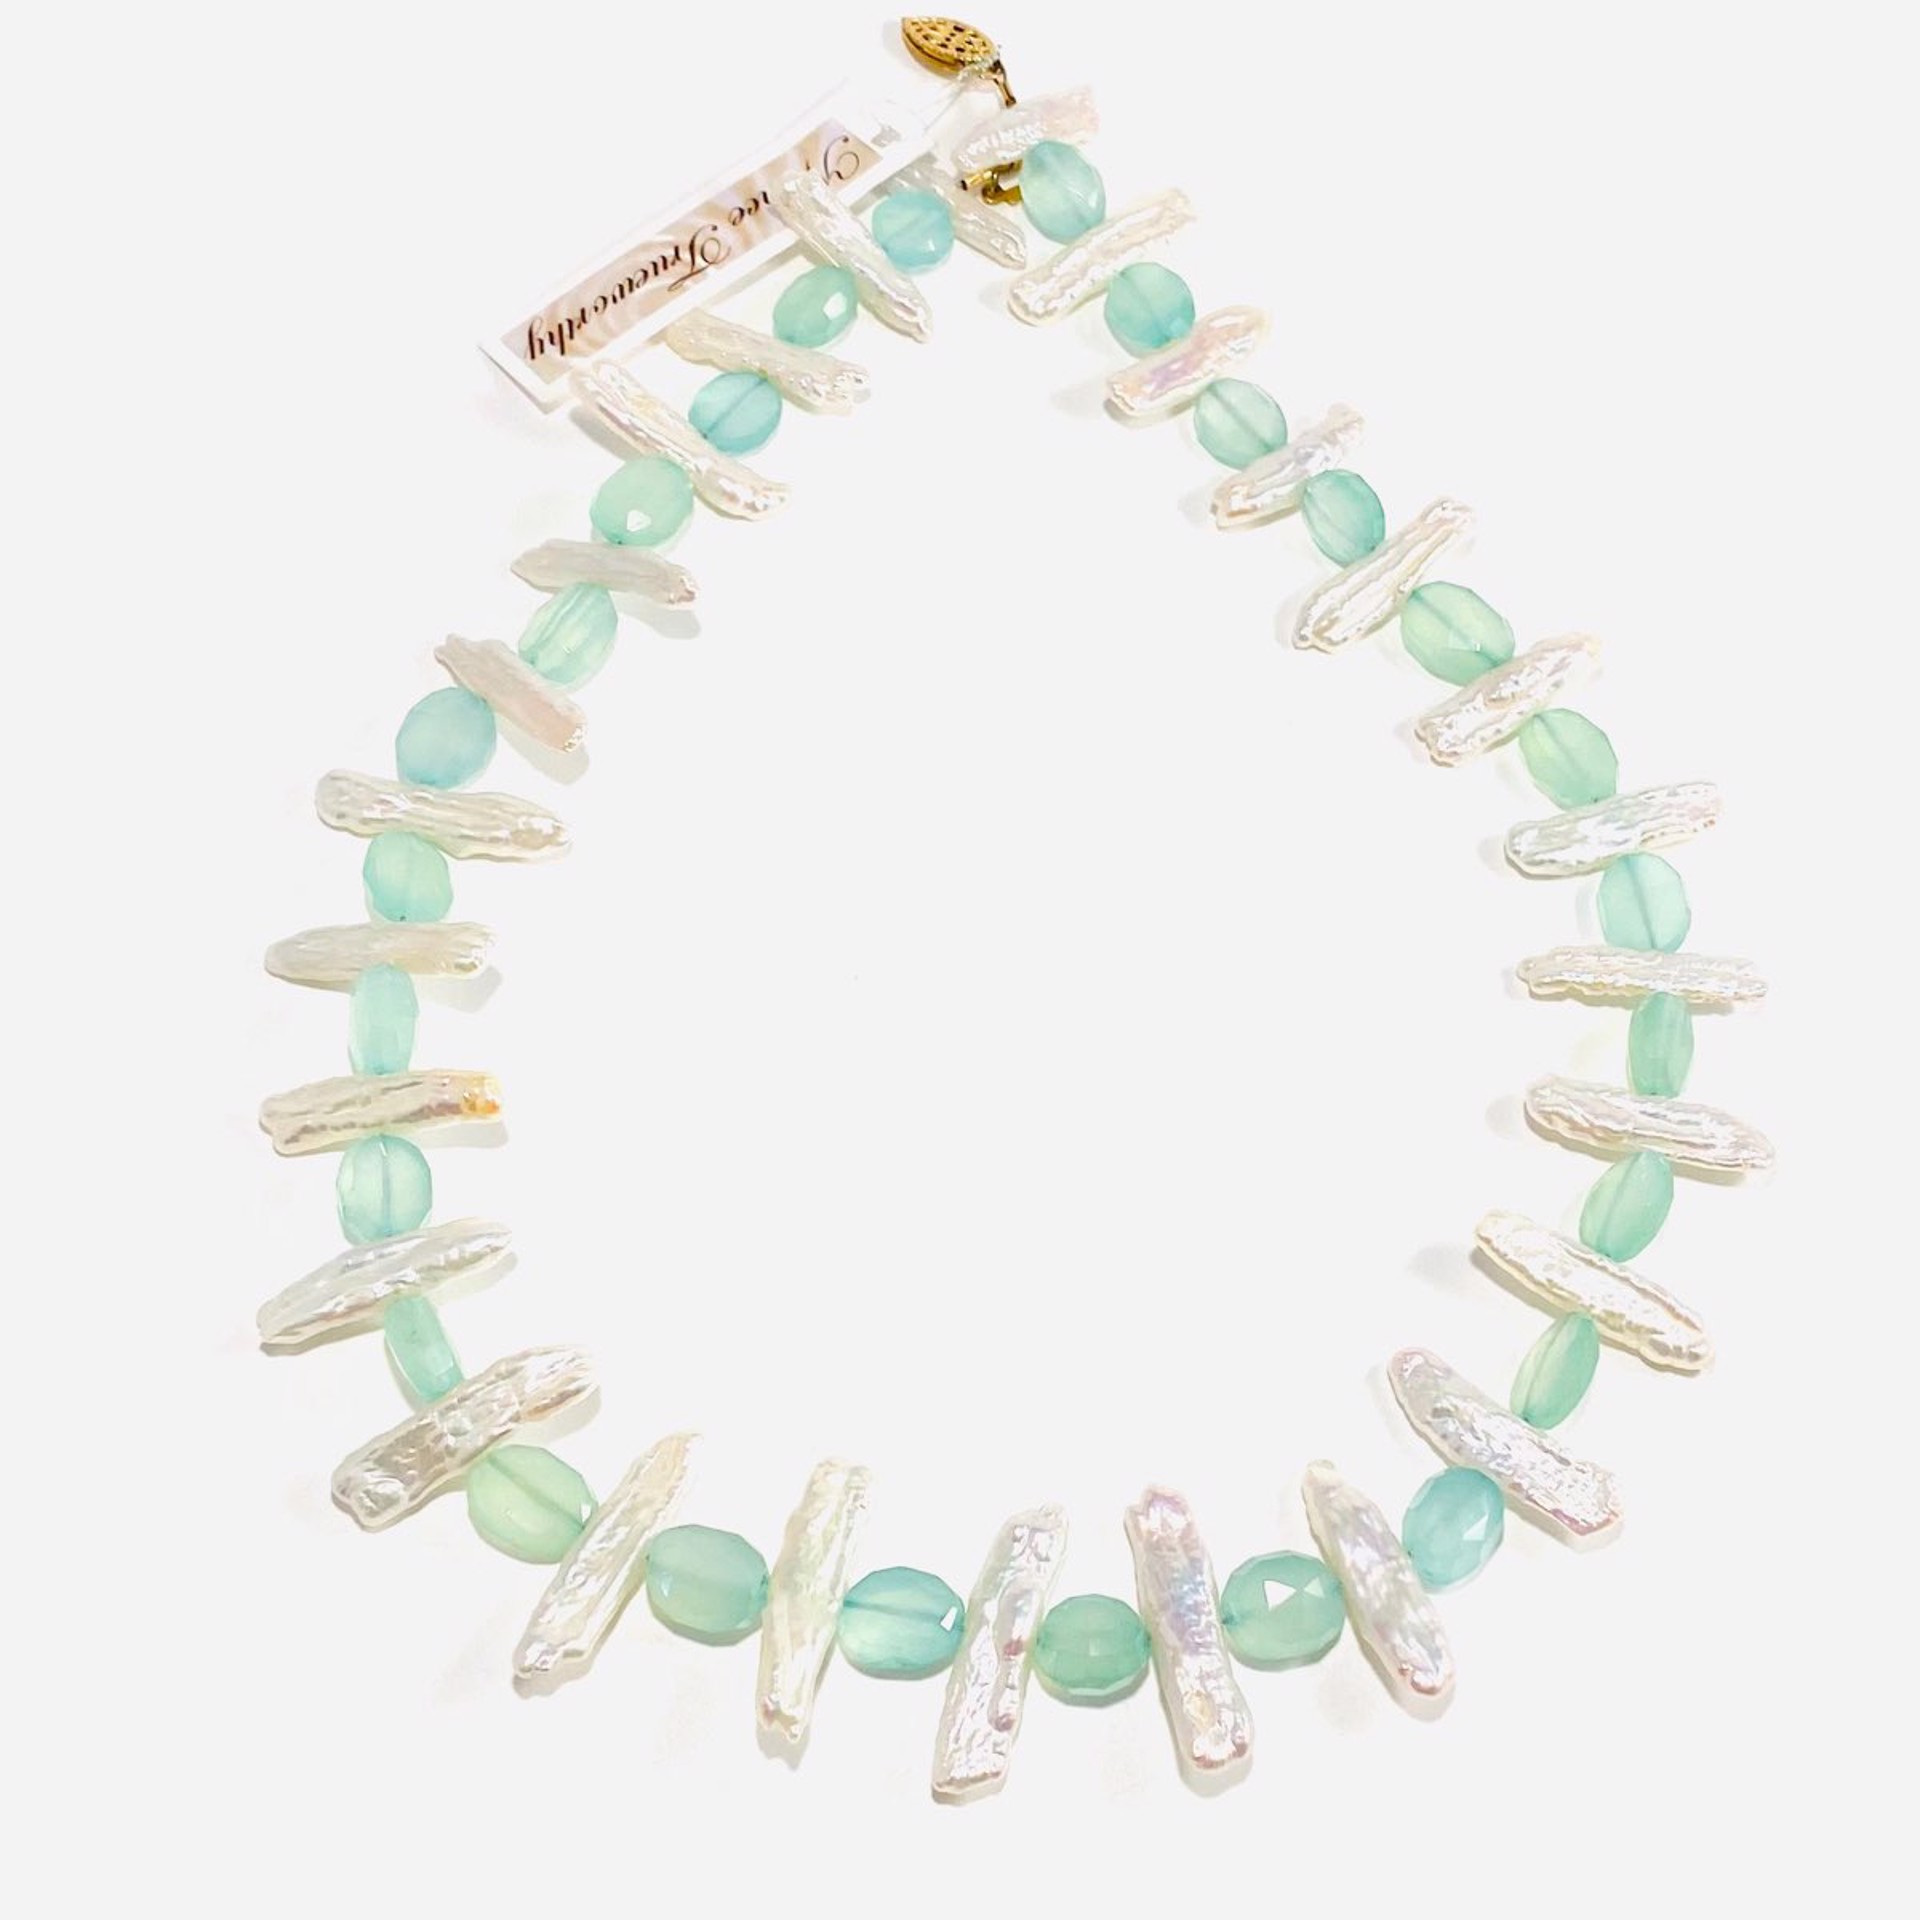 NT22-159 White Biwa Pearl Faceted Oval Seafoam Chalcedony Collar Necklace by Nance Trueworthy